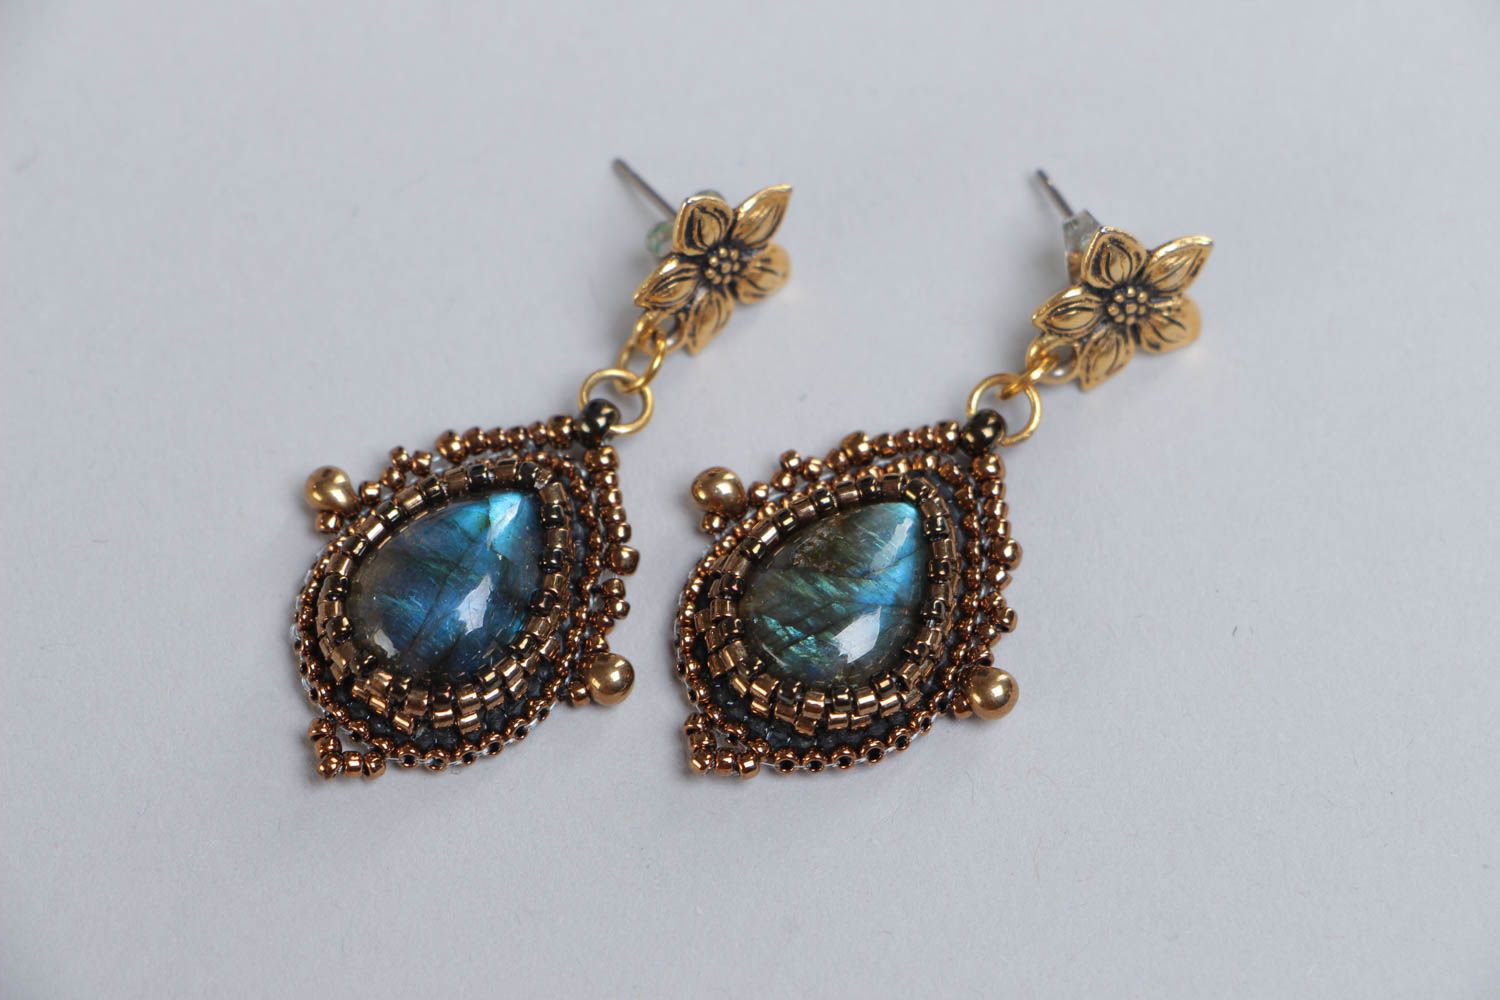 Handmade elegant evening dangling earrings with beads and labradorite stone photo 2